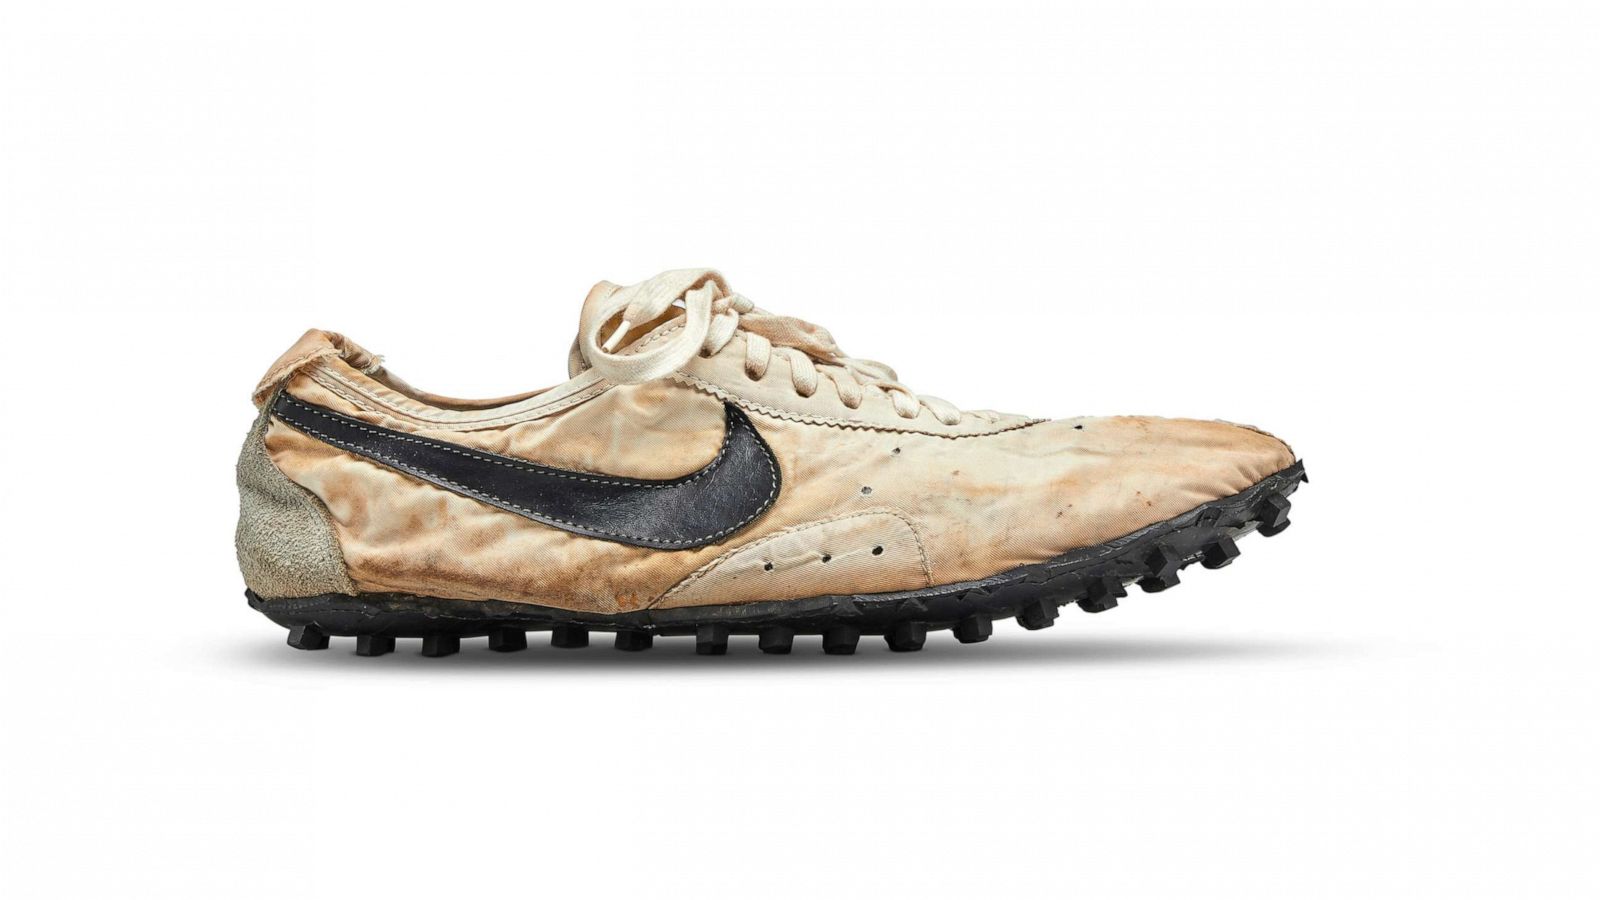 Sotheby's to off rare Nike sneakers, starting bids $80,000 - ABC News